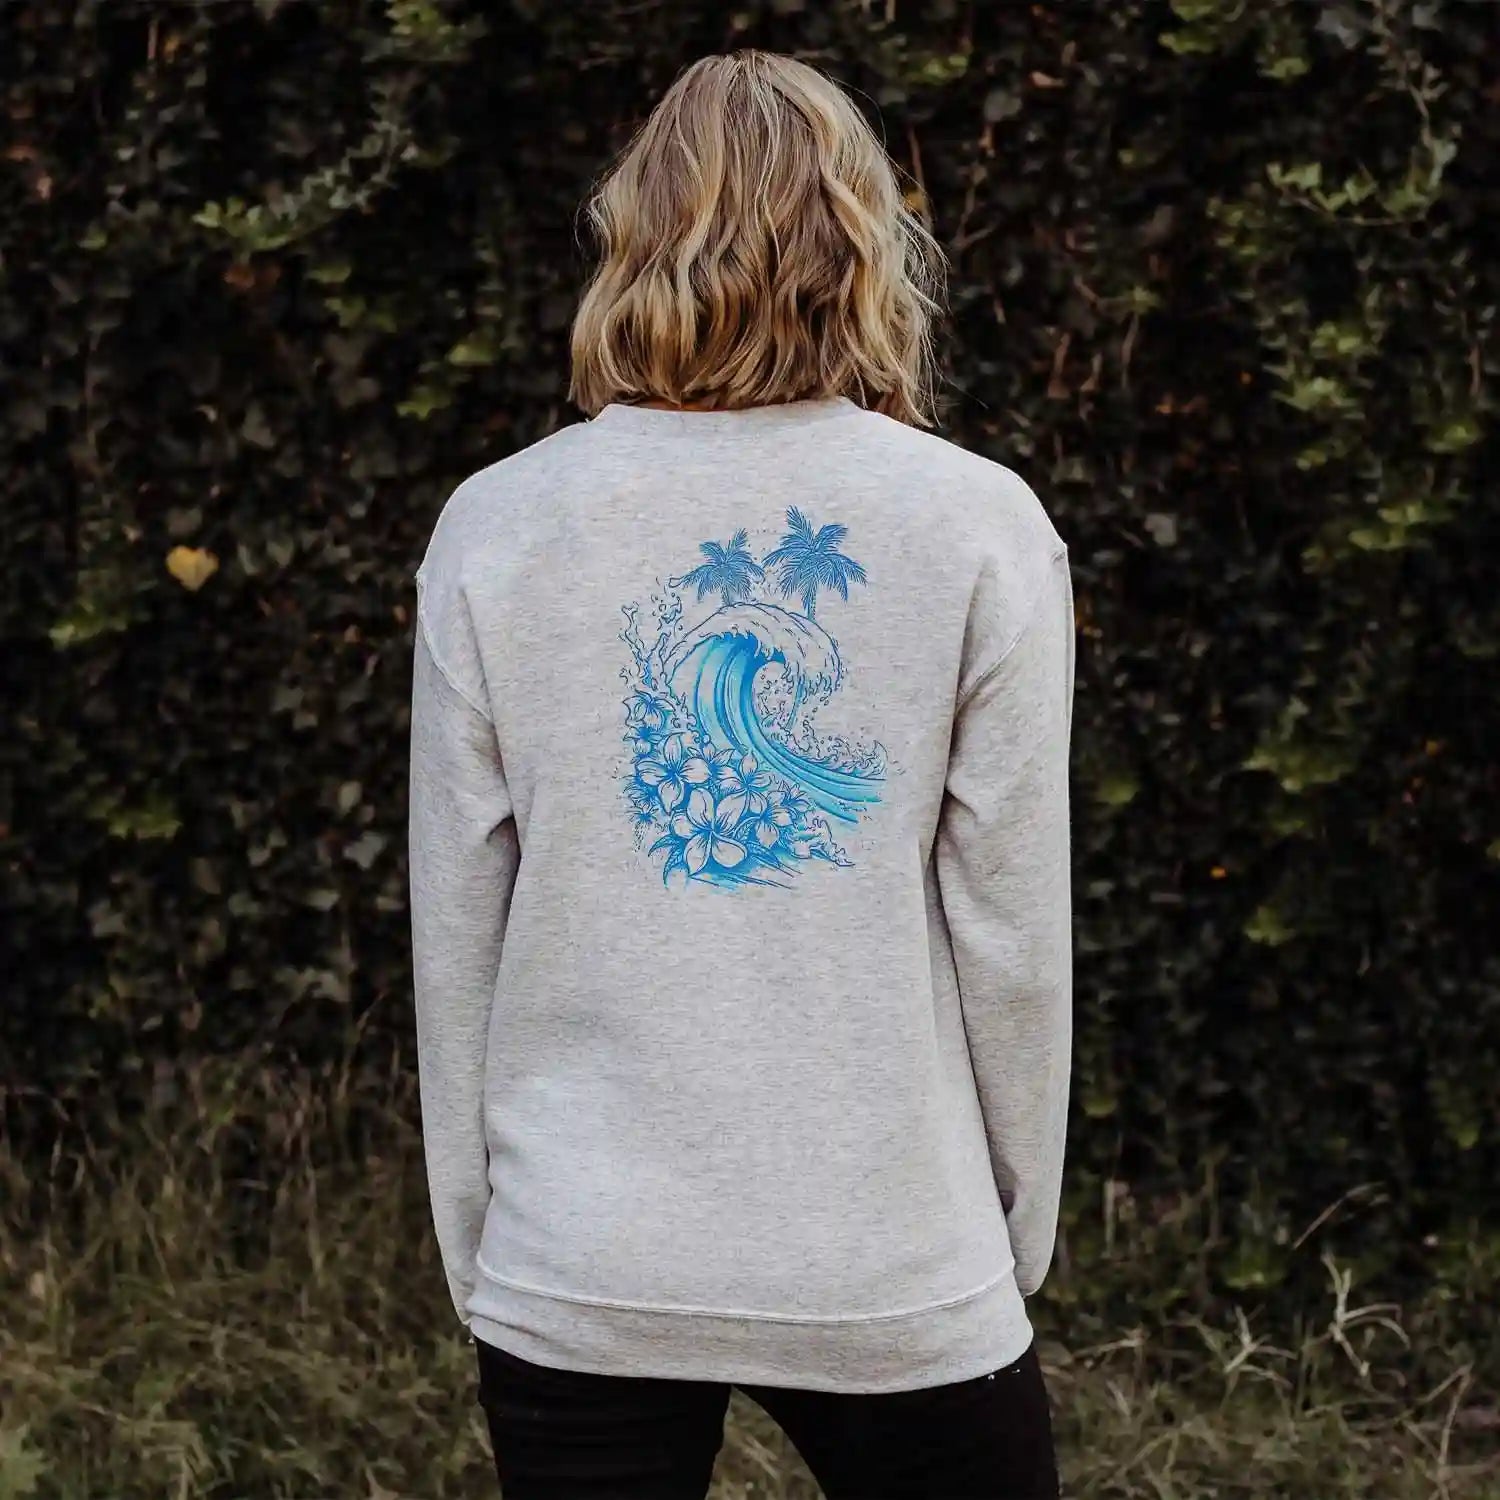 A person standing in front of a bush wearing Be Still and Know Christian apparel, specifically the Kupa'a Tide Sweatshirt.